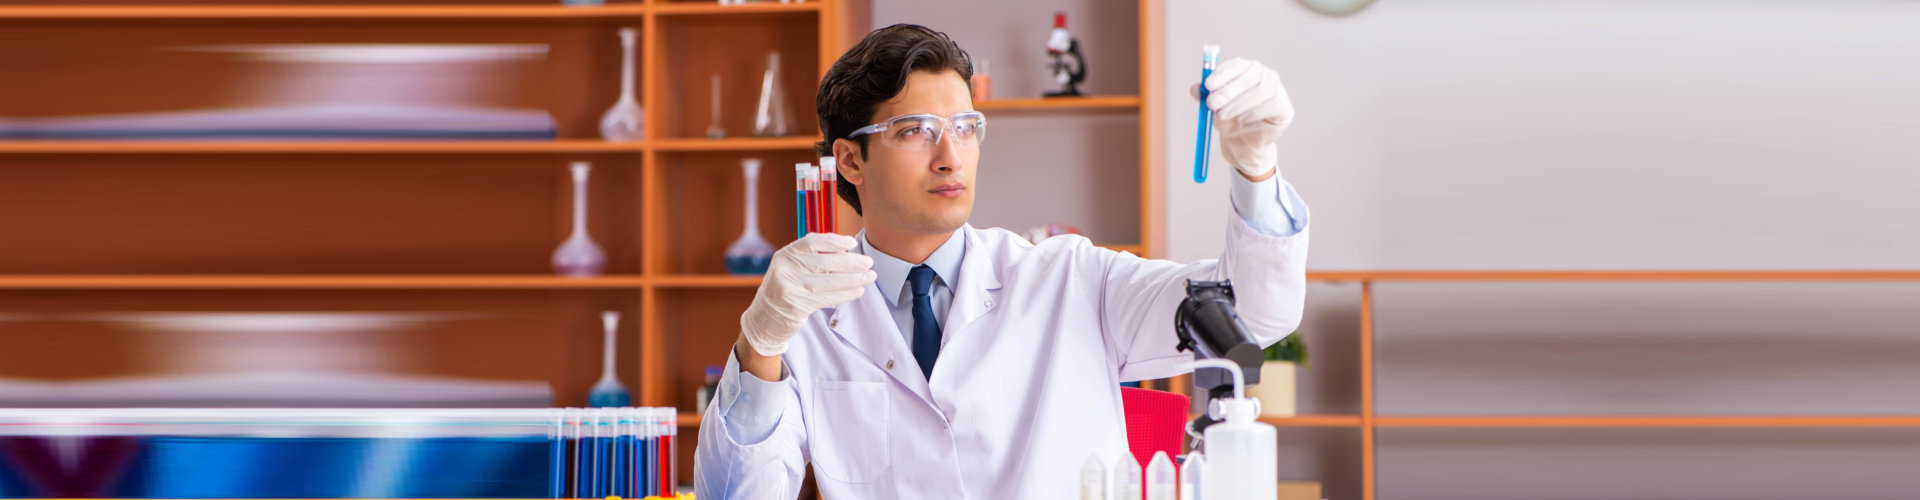 chemist holding test tubes with chemicals